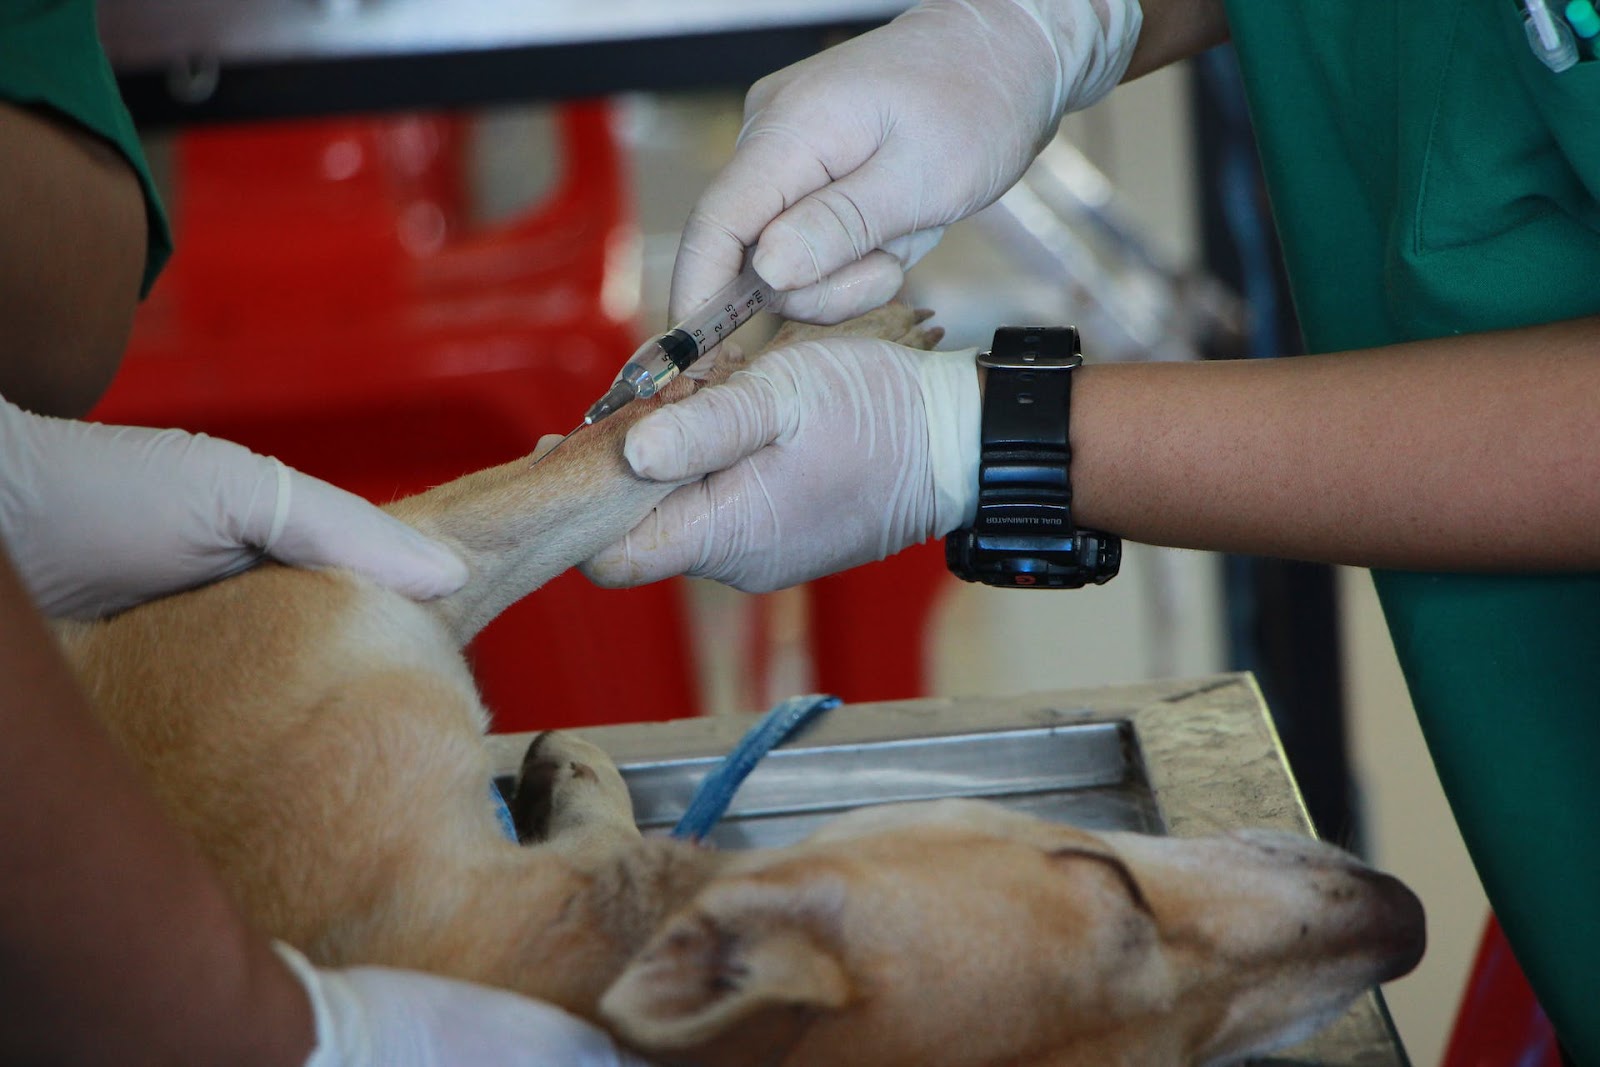 dog receiving first aid being treated on a table at the vet